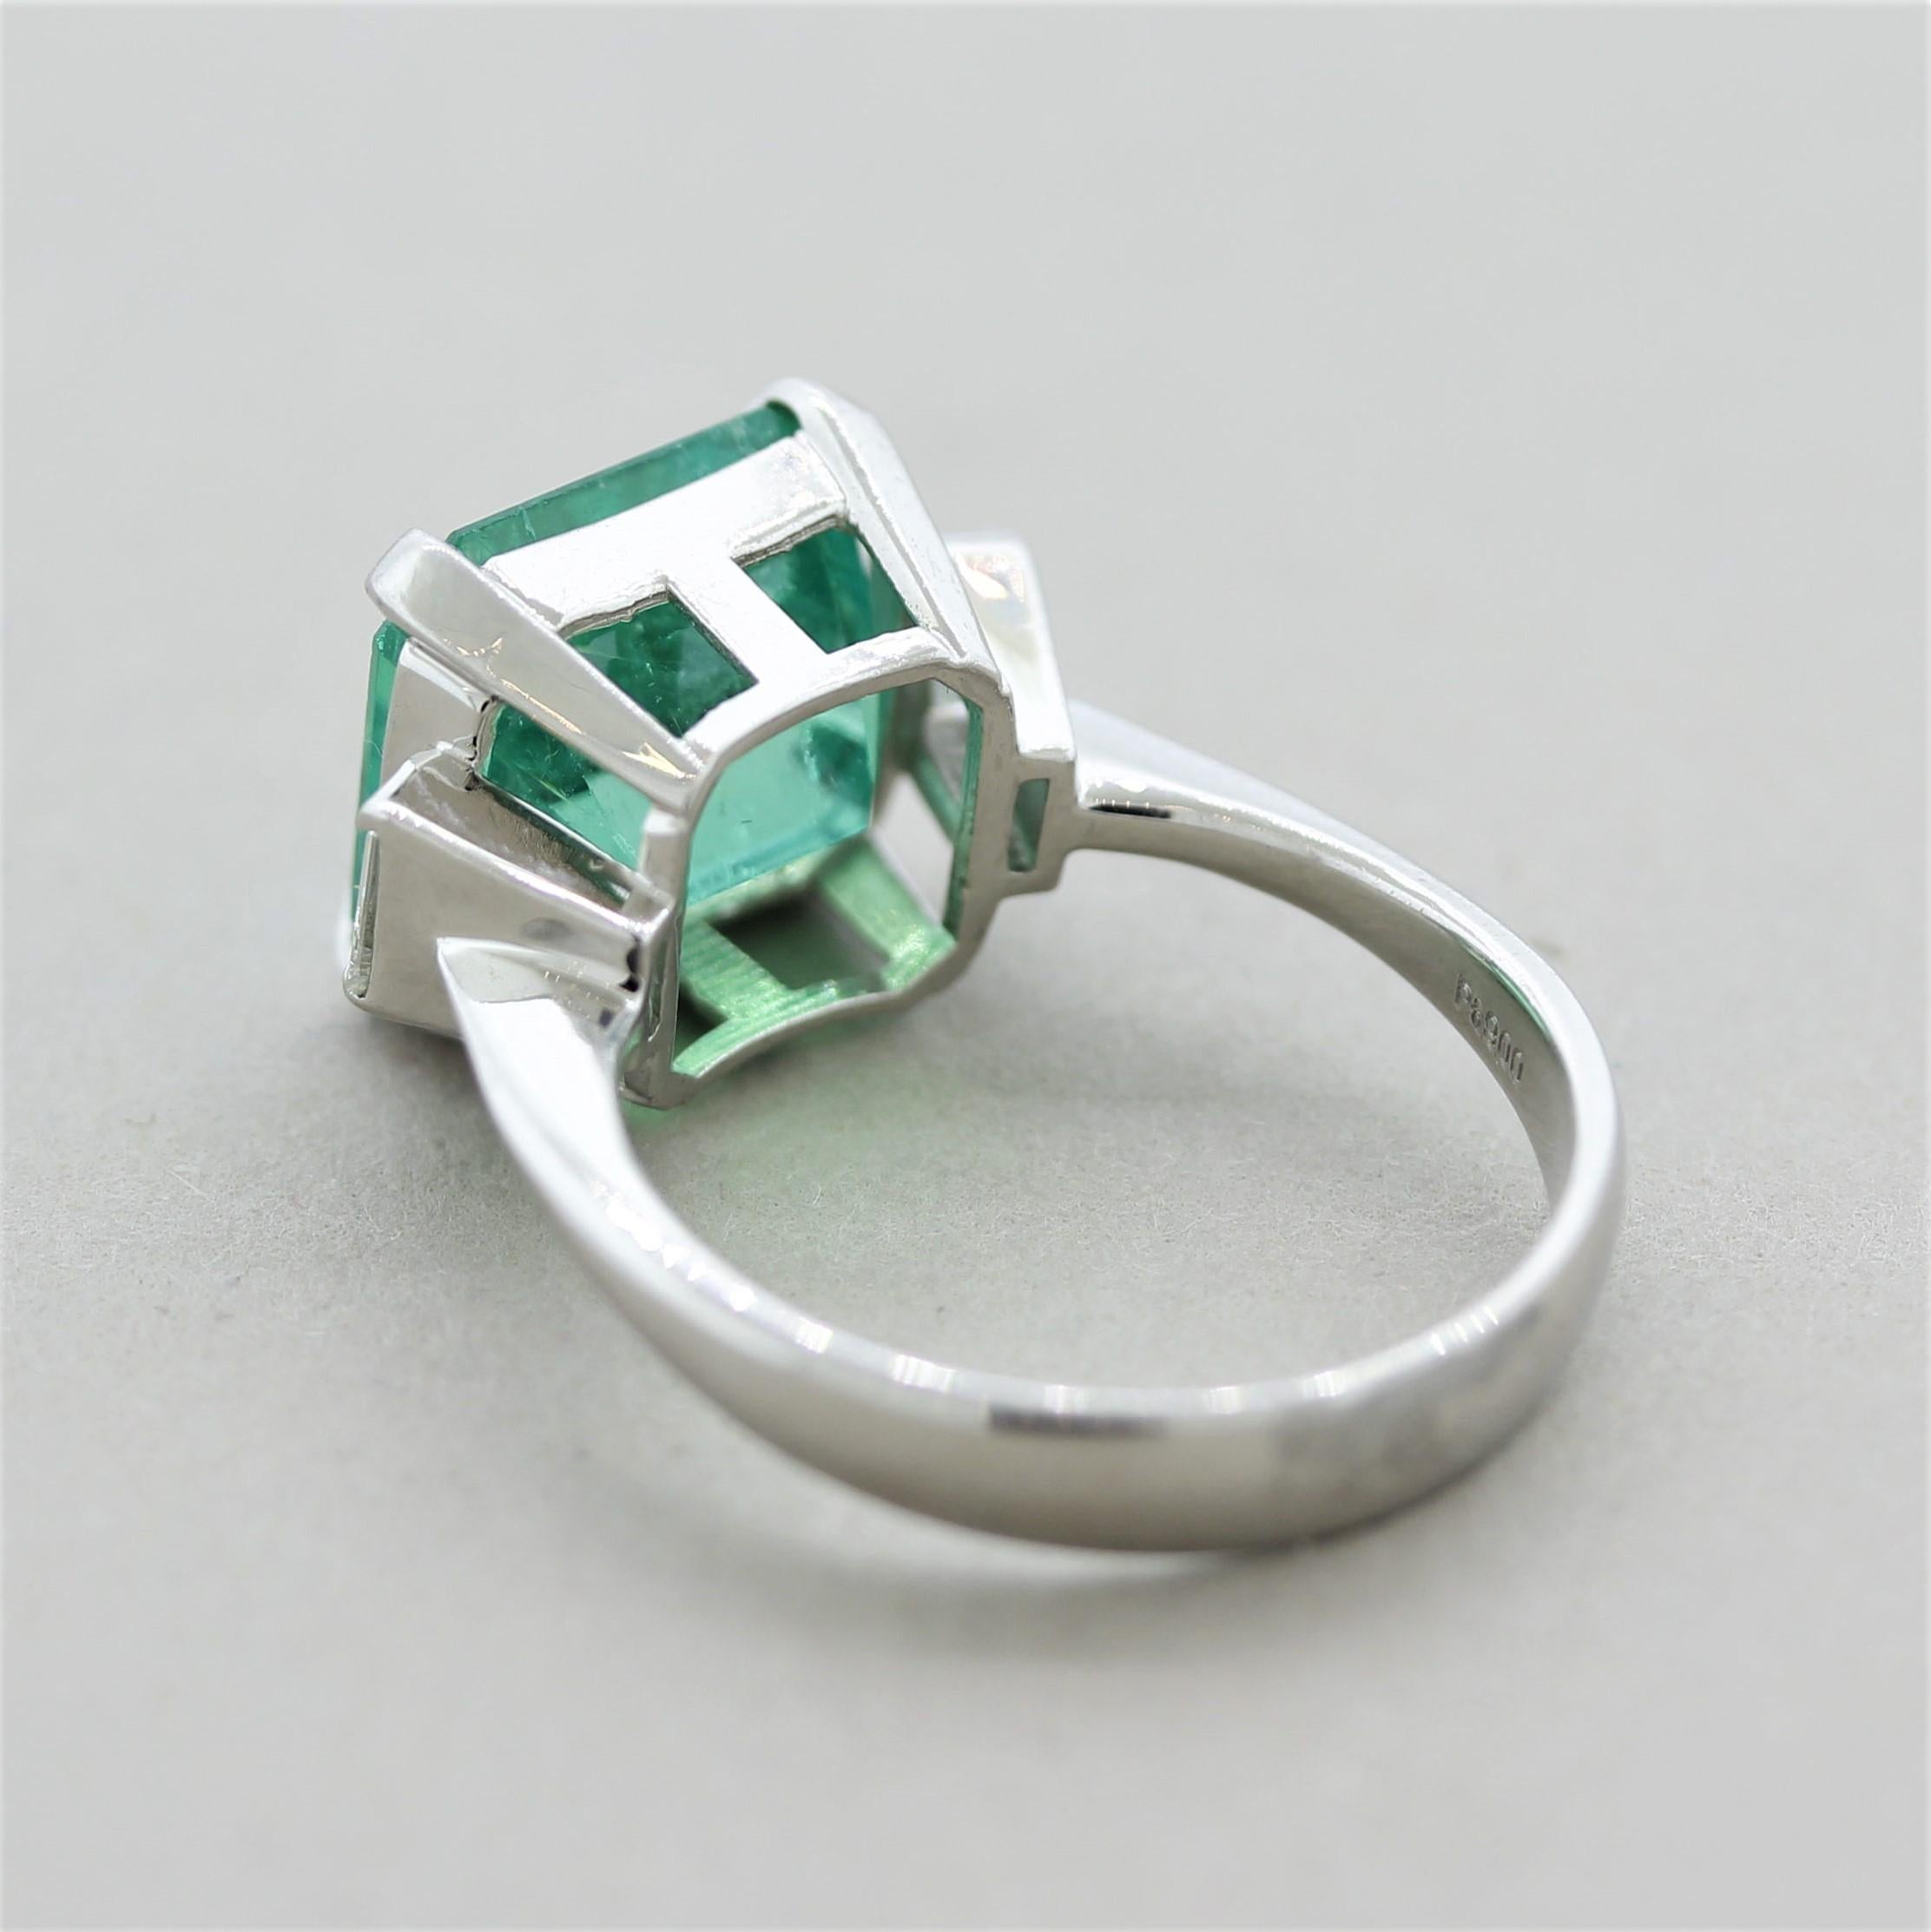 Women's 5.43 Carat Colombian Emerald Diamond Platinum Ring, GIA Certified For Sale